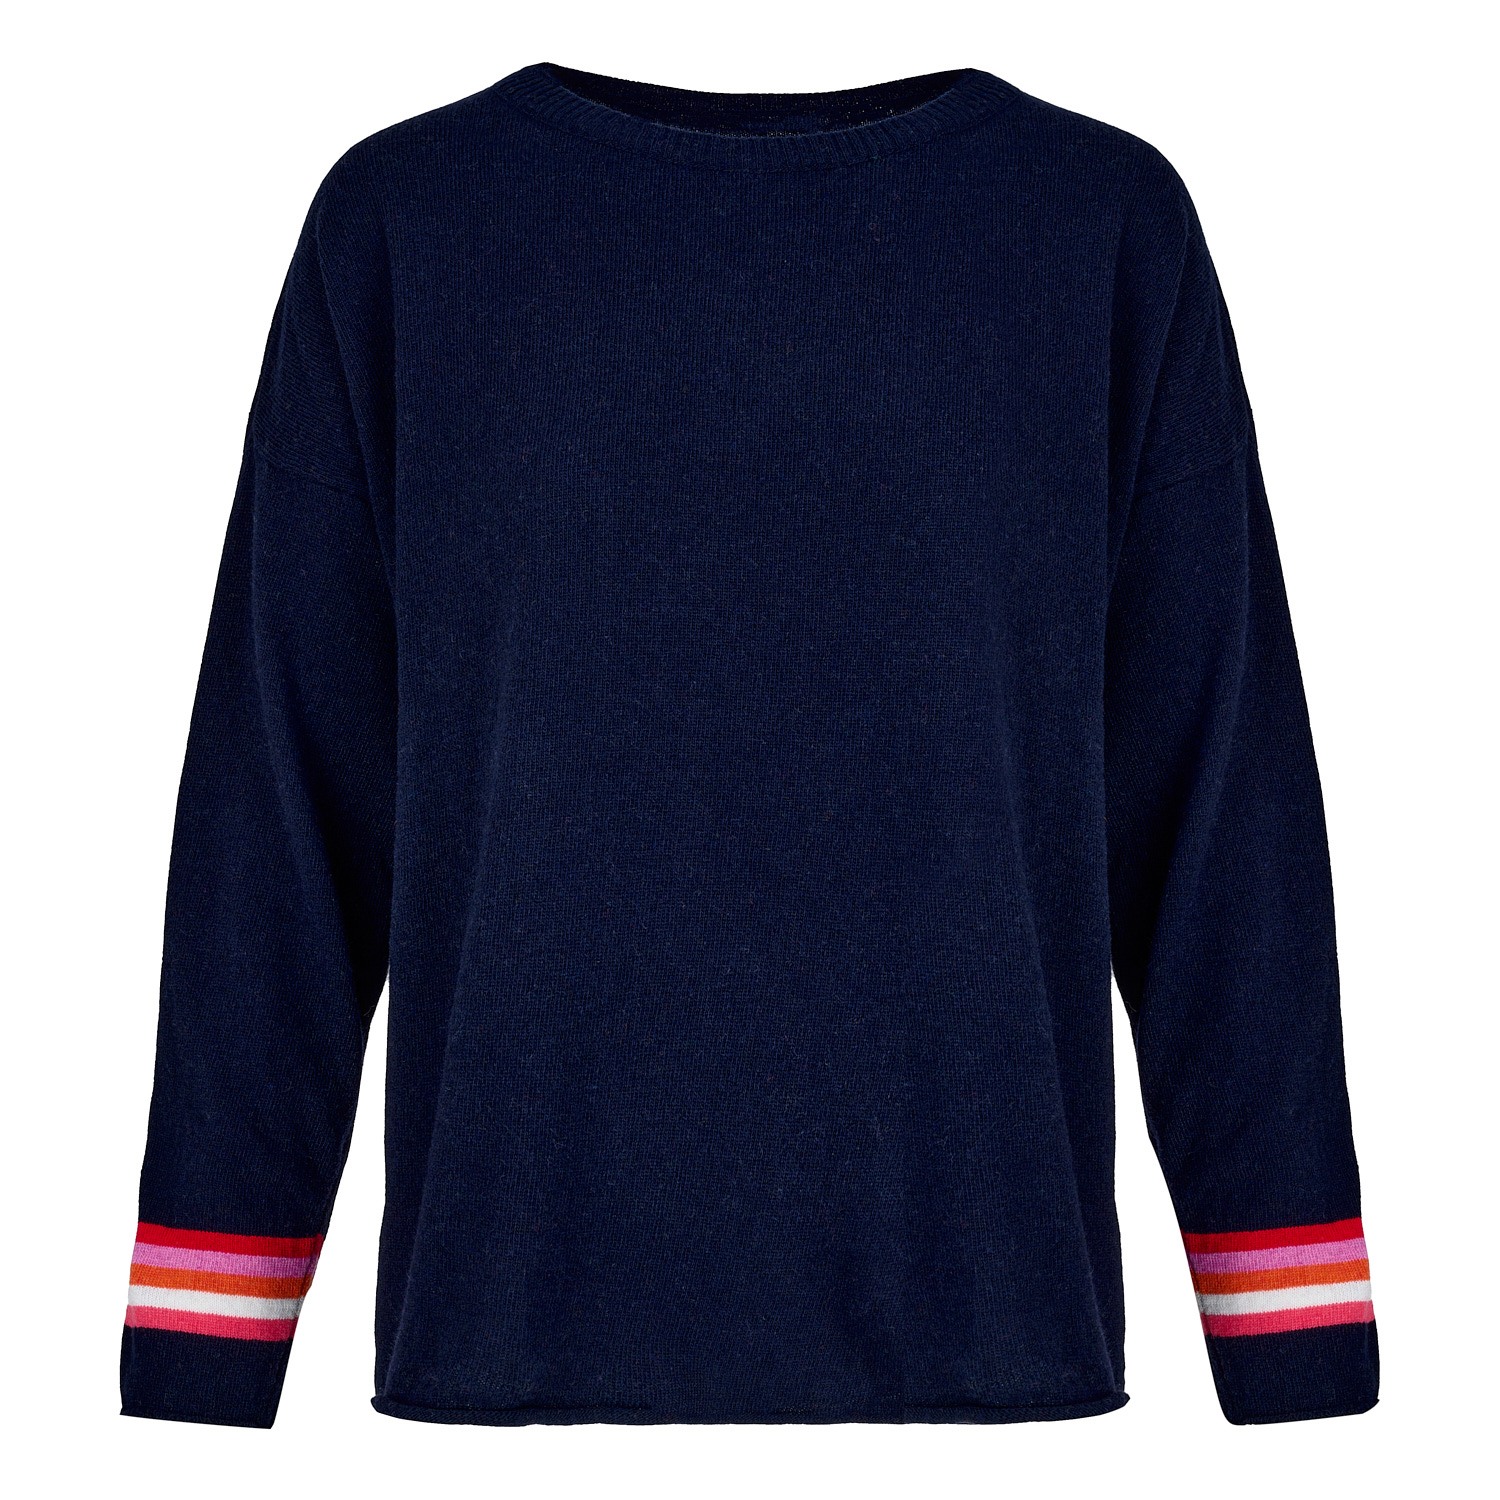 Women’s Blue Cashmere Mix Sweater In Navy With Hem & Cuff Multi Stripe One Size At Last...